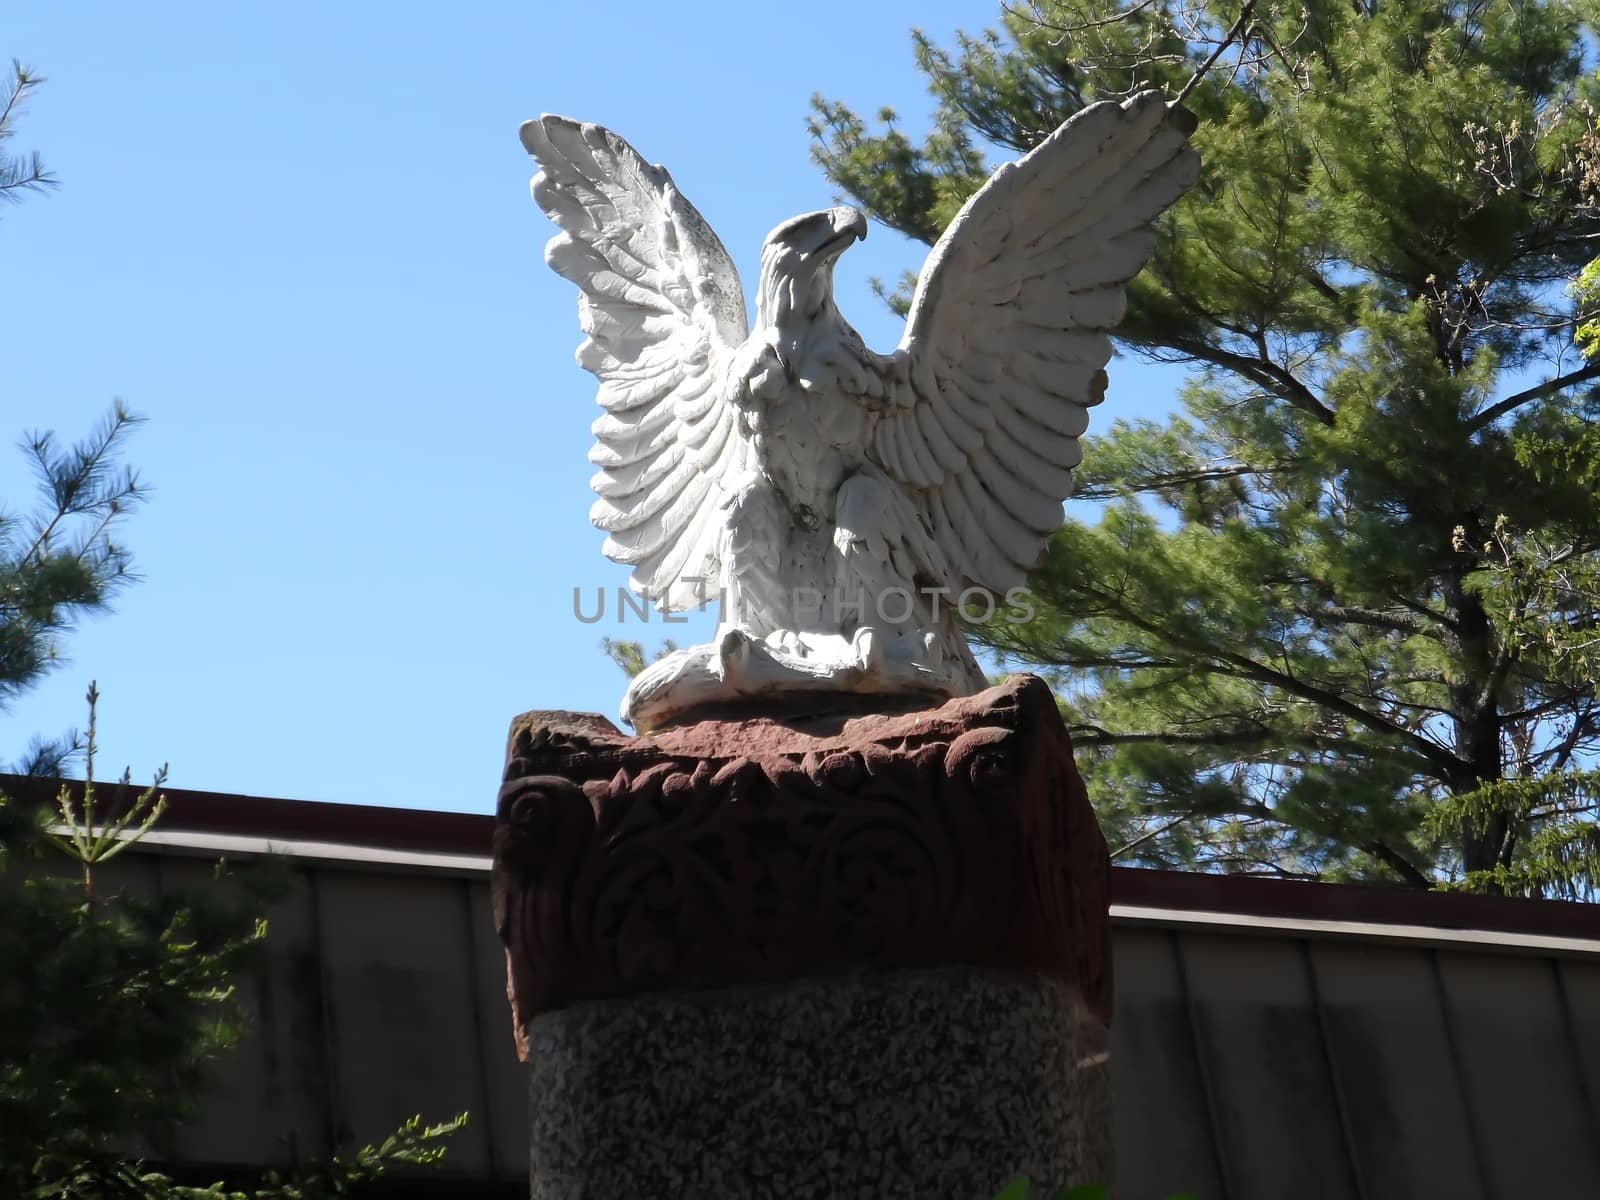 Old Abe American Eagle Statue